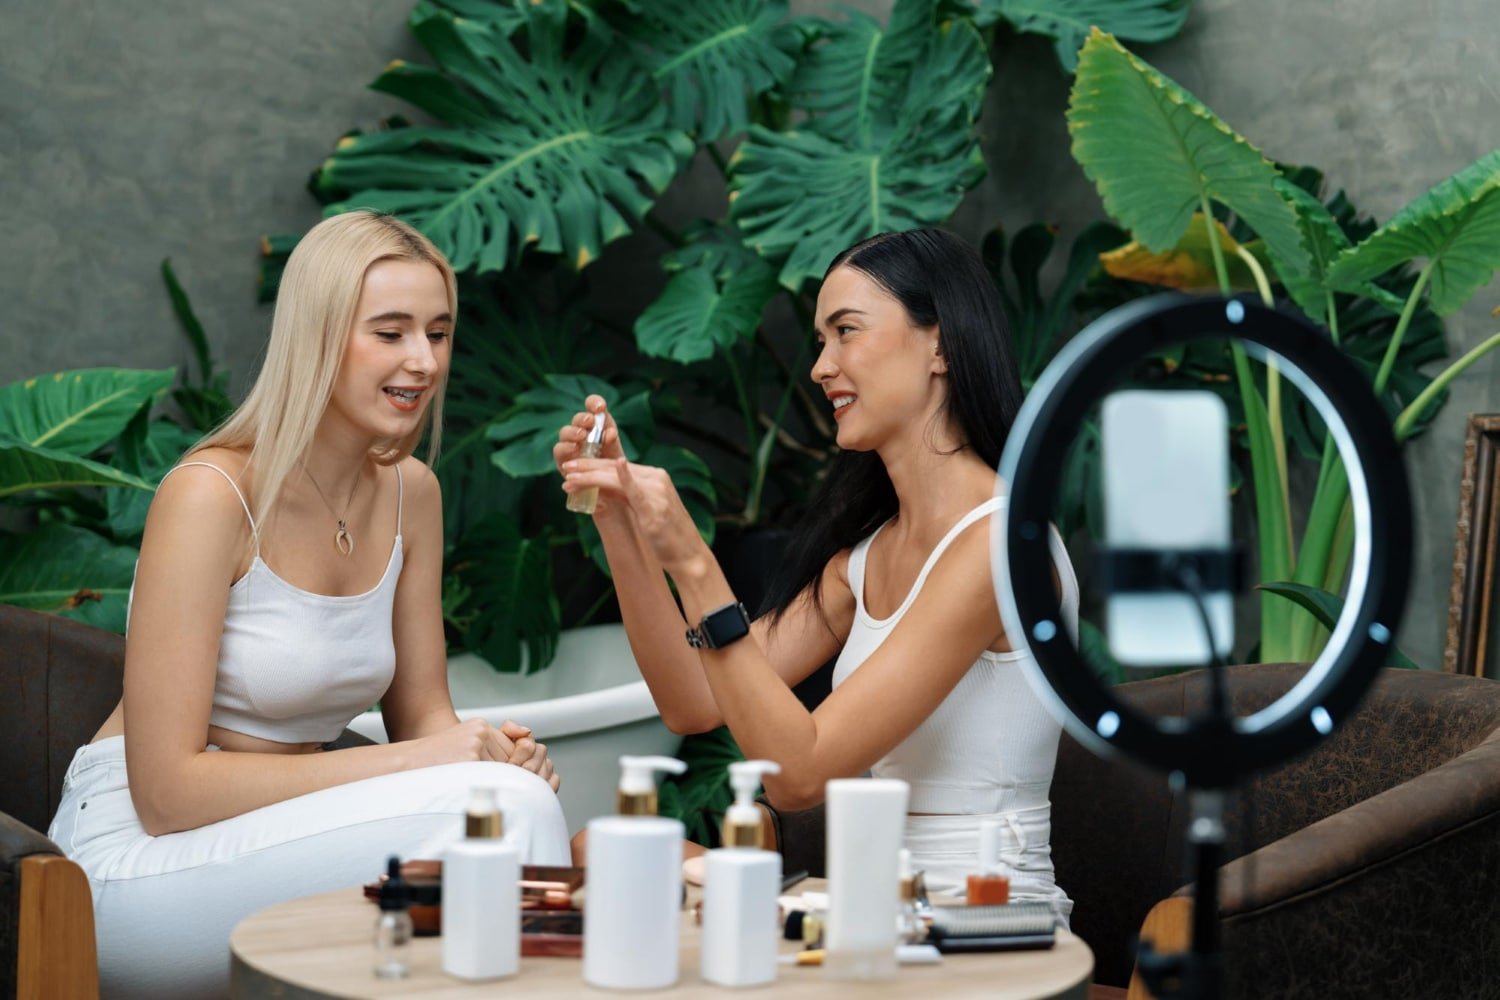 Experience Natural Skincare With Caudalie – New 2019 Dynamic Program